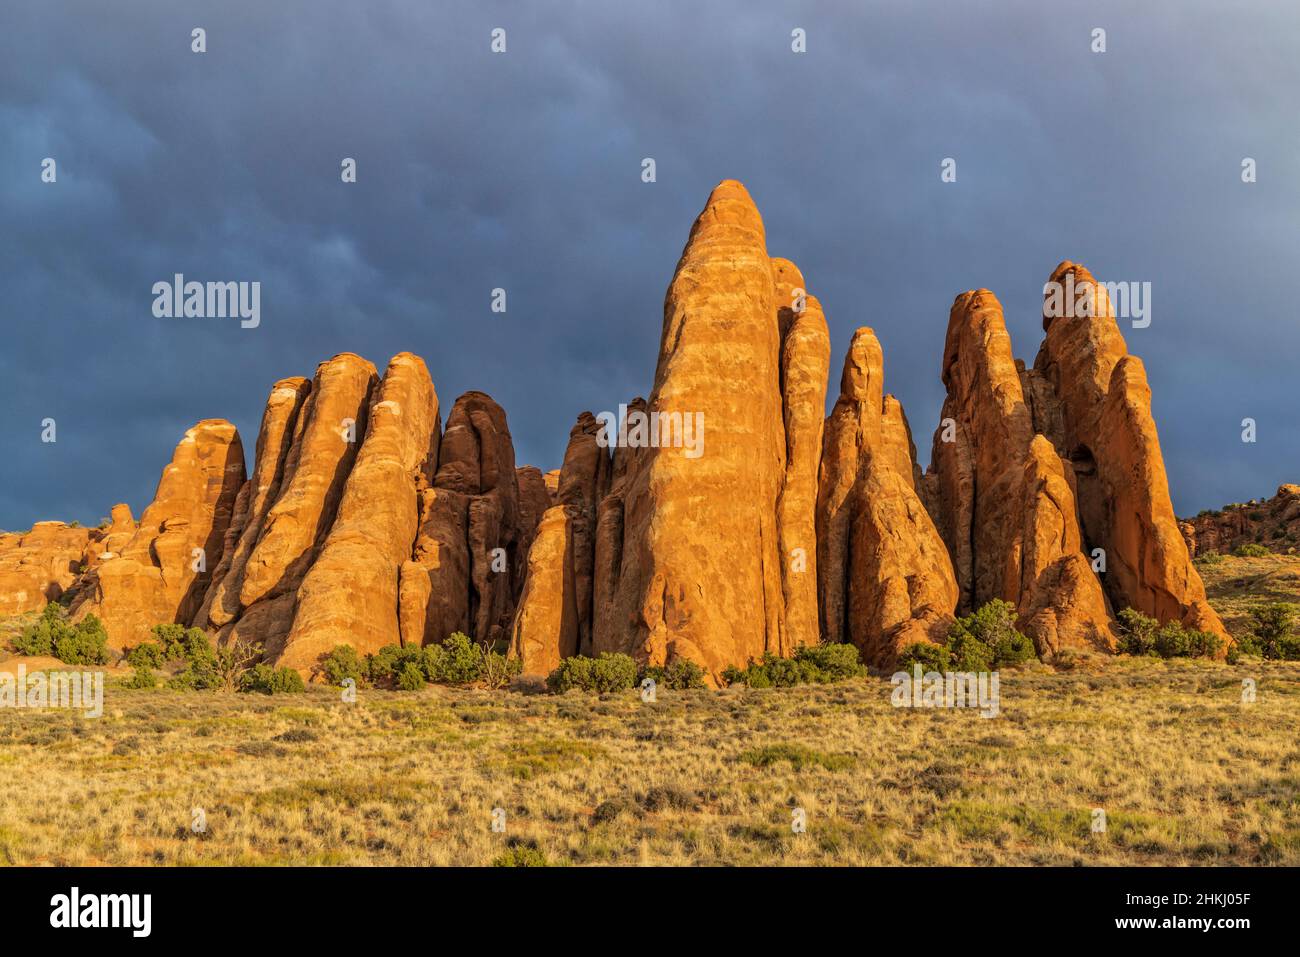 Sunlit red rock fins against a dark sky reminiscent of Stonehenge at Sand Dune Arch in Arches National Park near Moab, Utah. Stock Photo